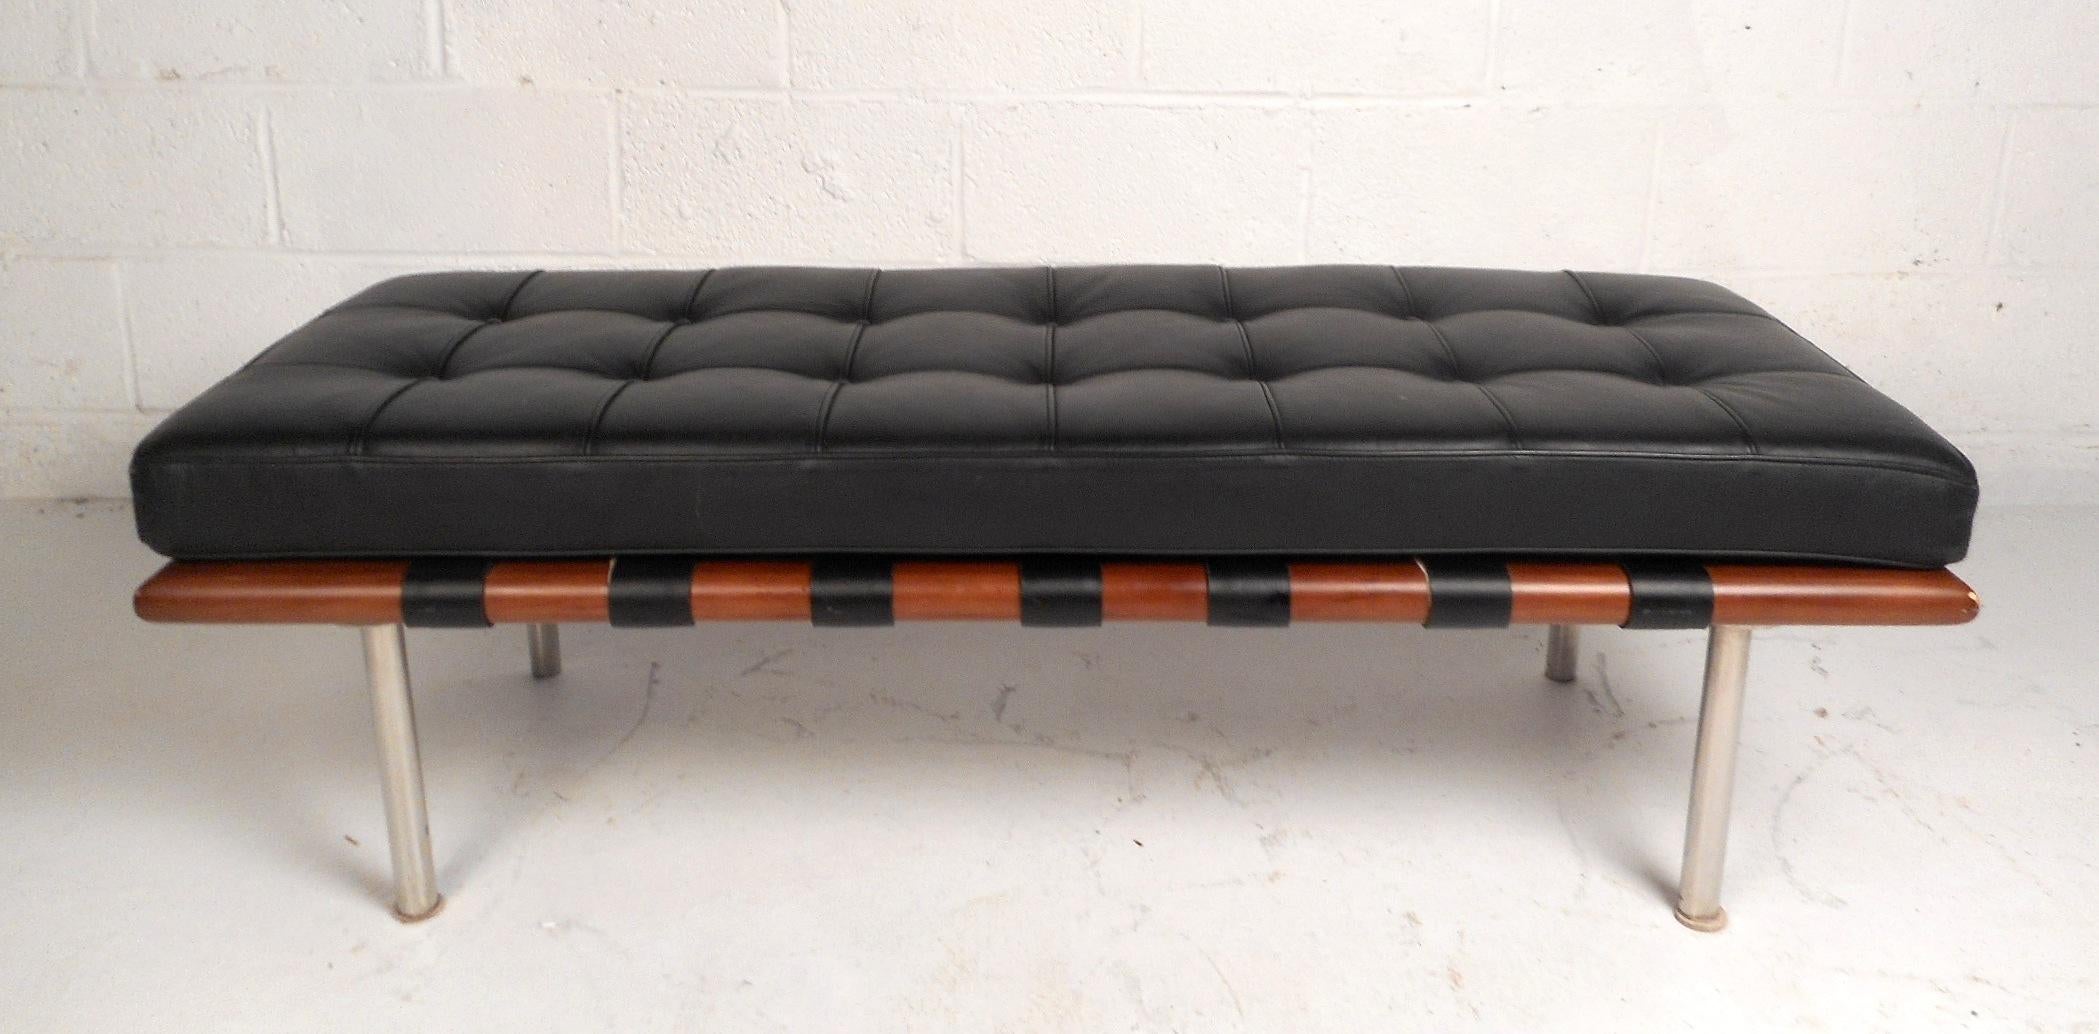 This lovely contemporary leather bench has a thick and soft tufted cushion. The comfortable bench cushion is fastened to the sleek teak frame with leather straps to prevent it from sliding off. The entire bench sits atop cylindrical chrome legs.